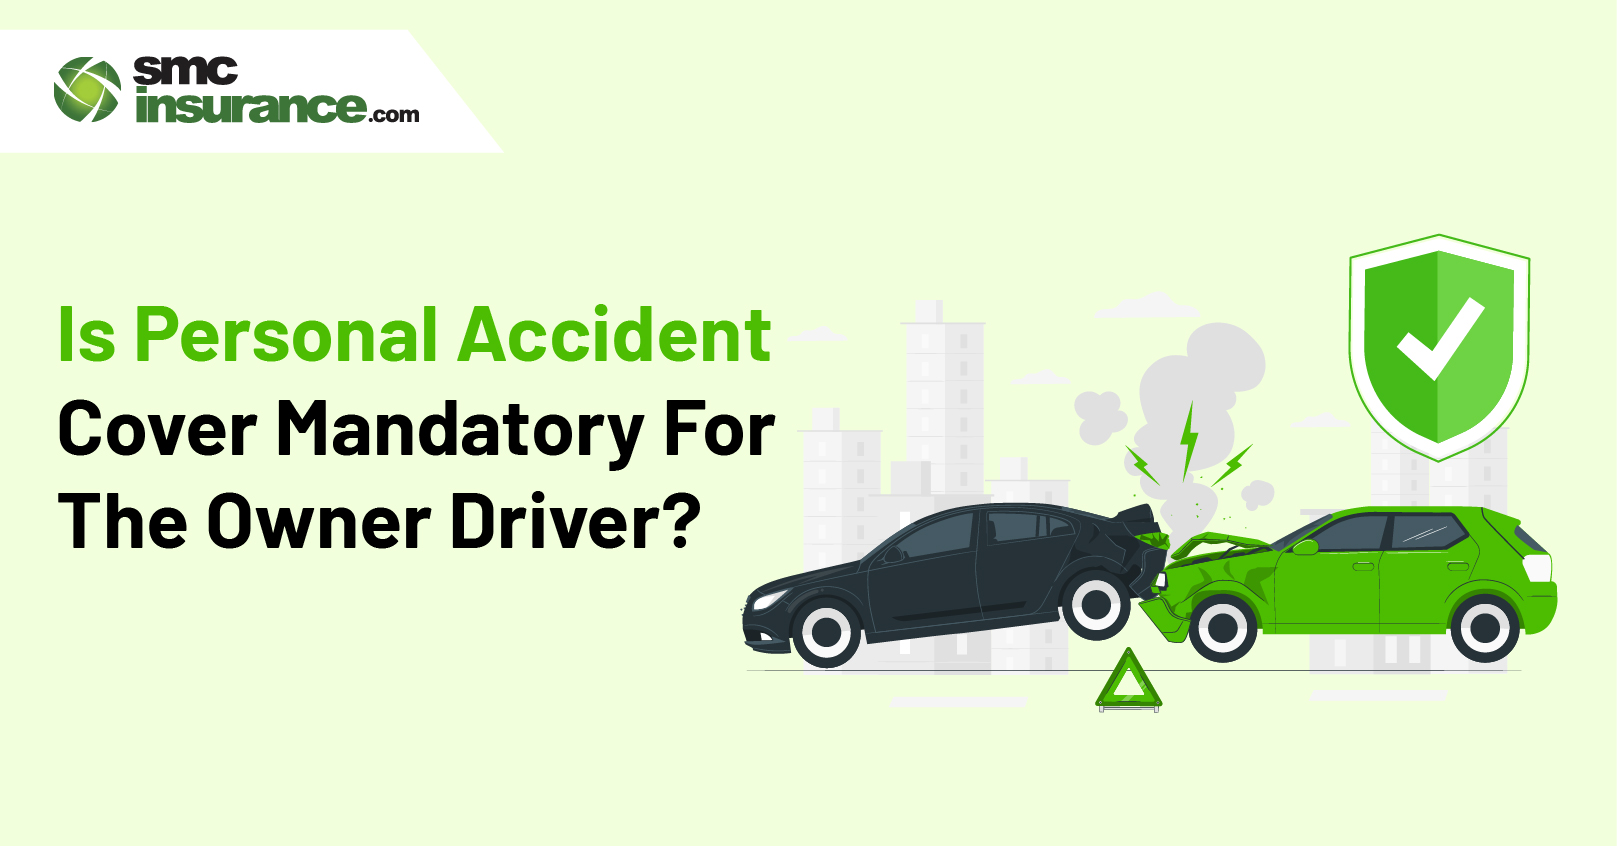 Is Personal Accident Cover Mandatory For The Owner-Driver?